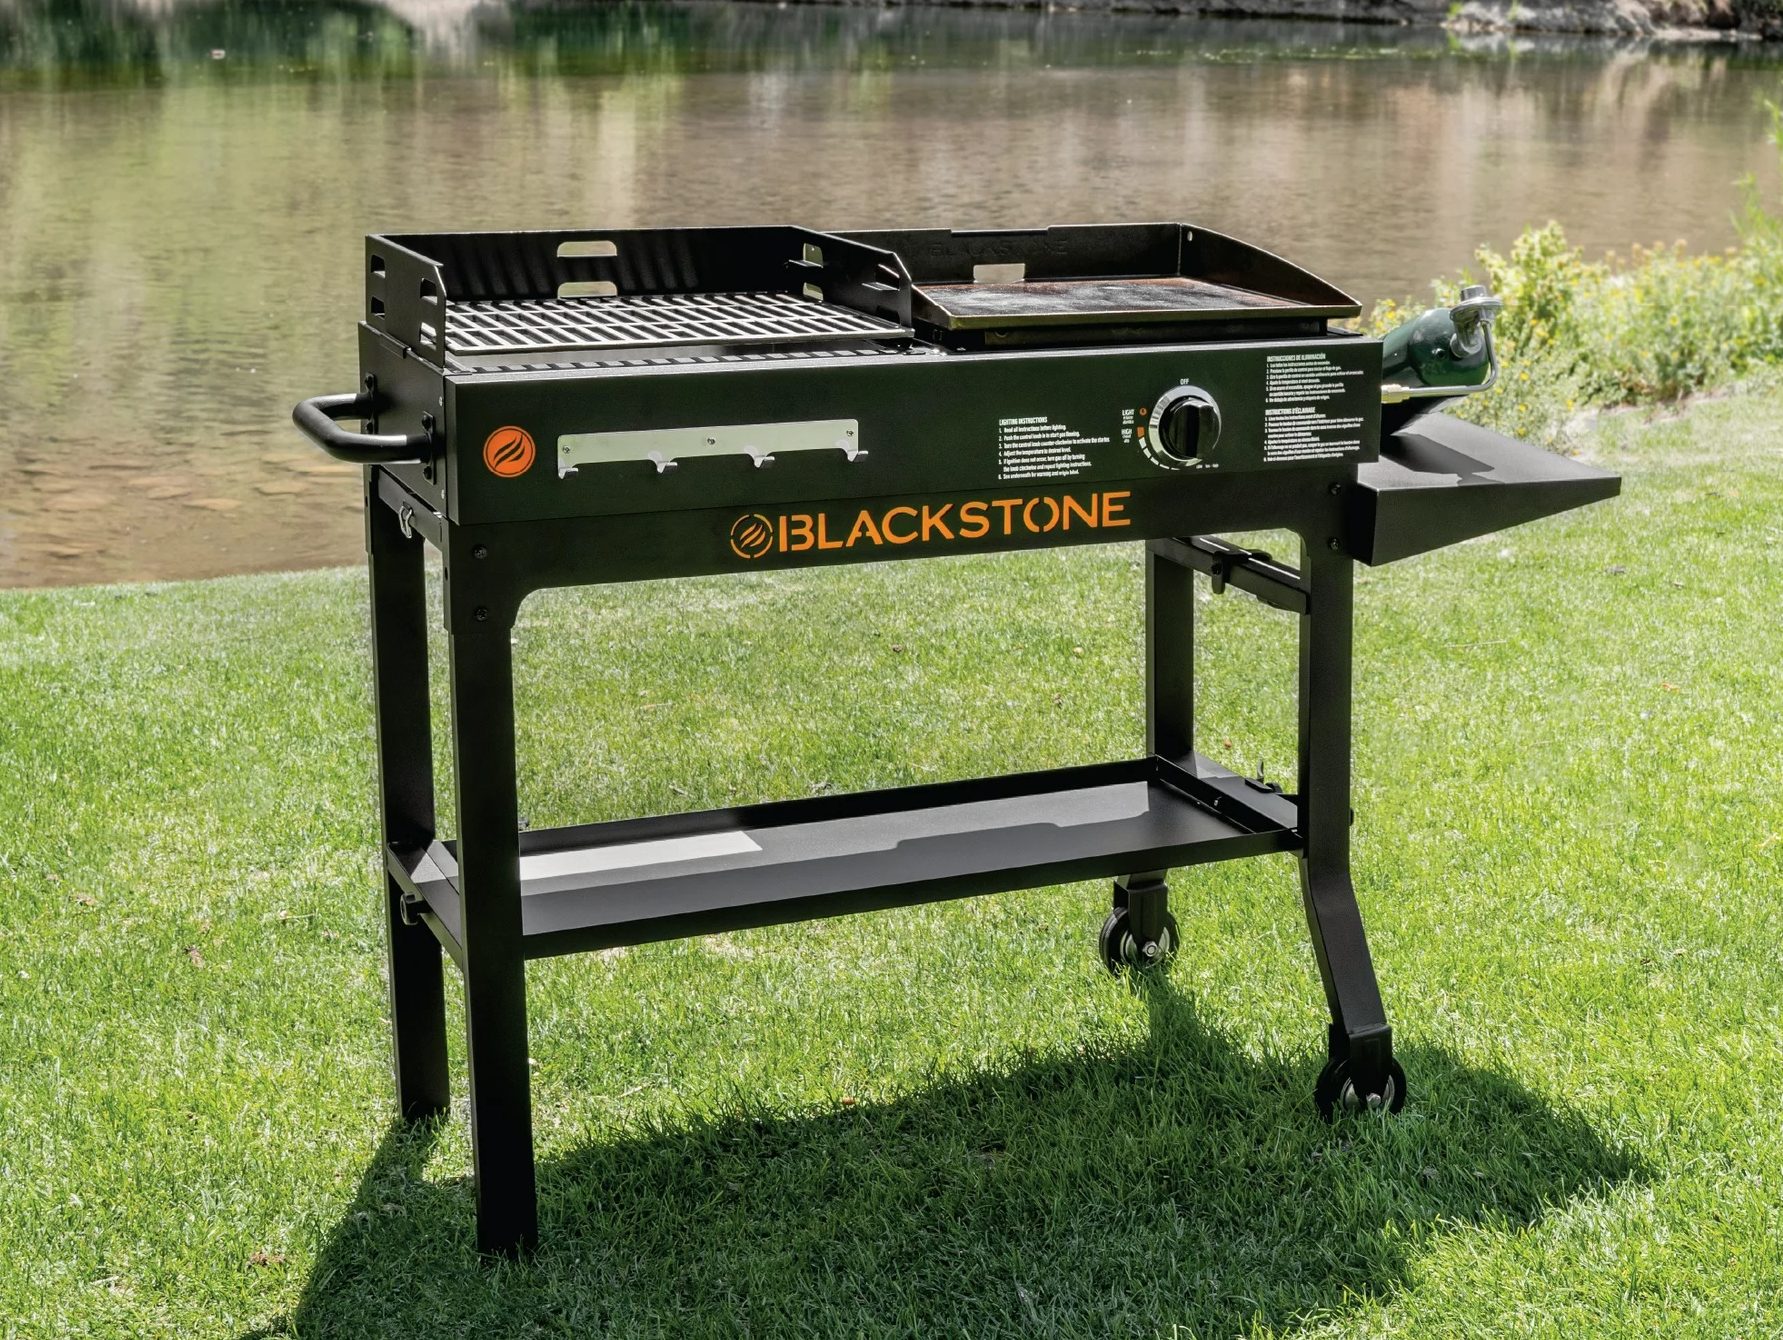 The Blackstone Duo 17-inch Propane Griddle and Charcoal Grill out on the lake.